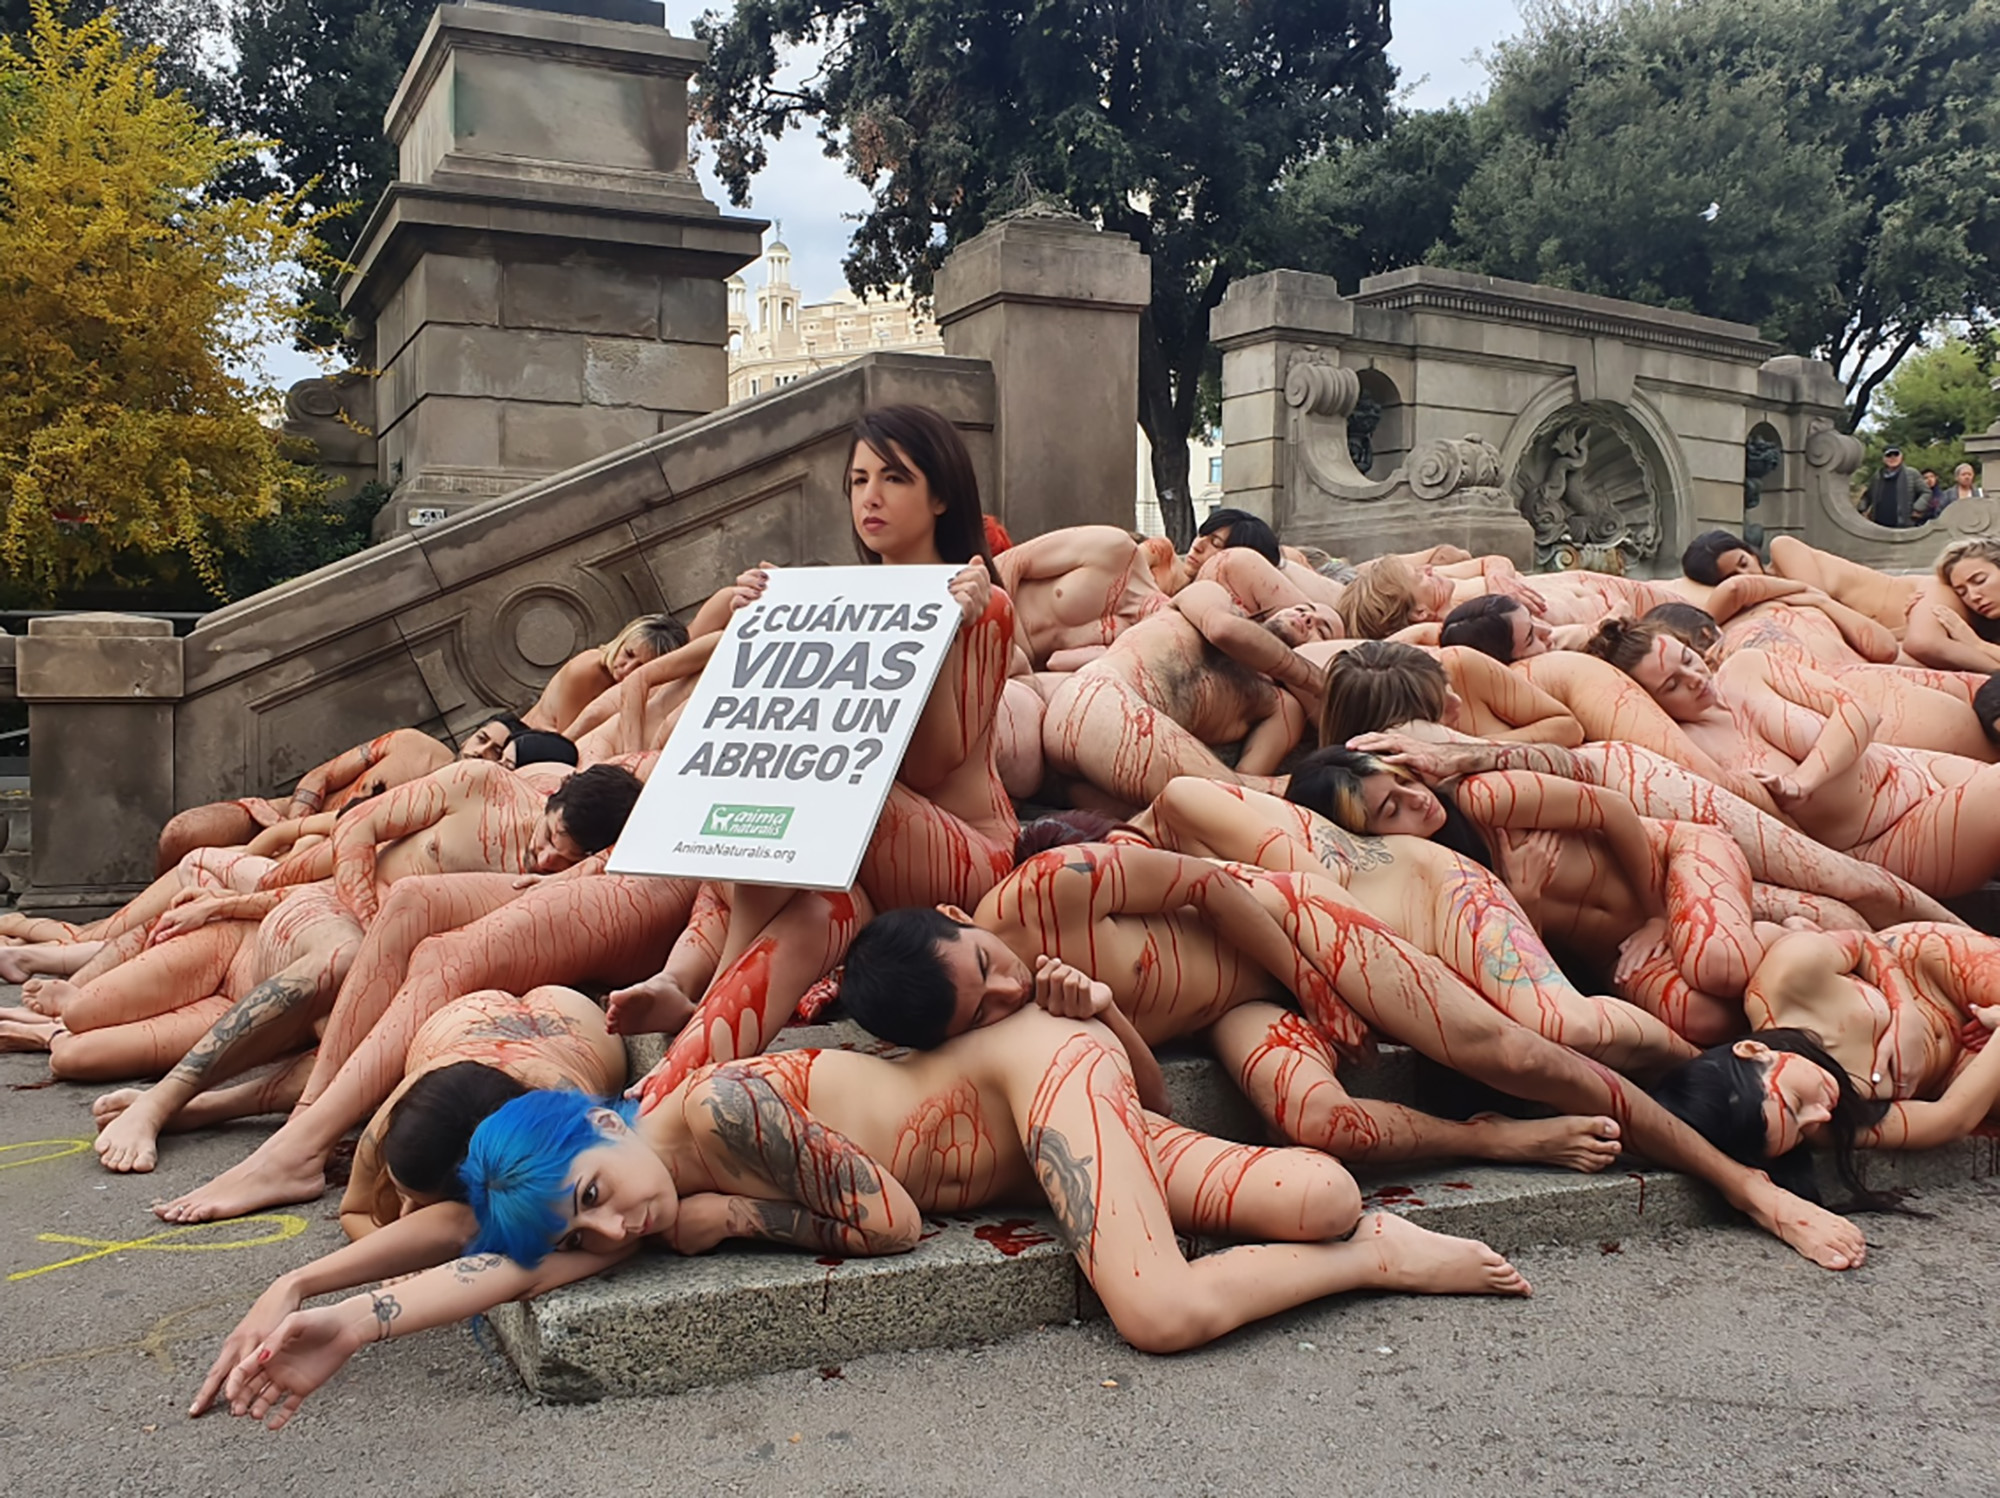 Read more about the article Bloodied Activists In Naked Barcelona Fur Trade Protest